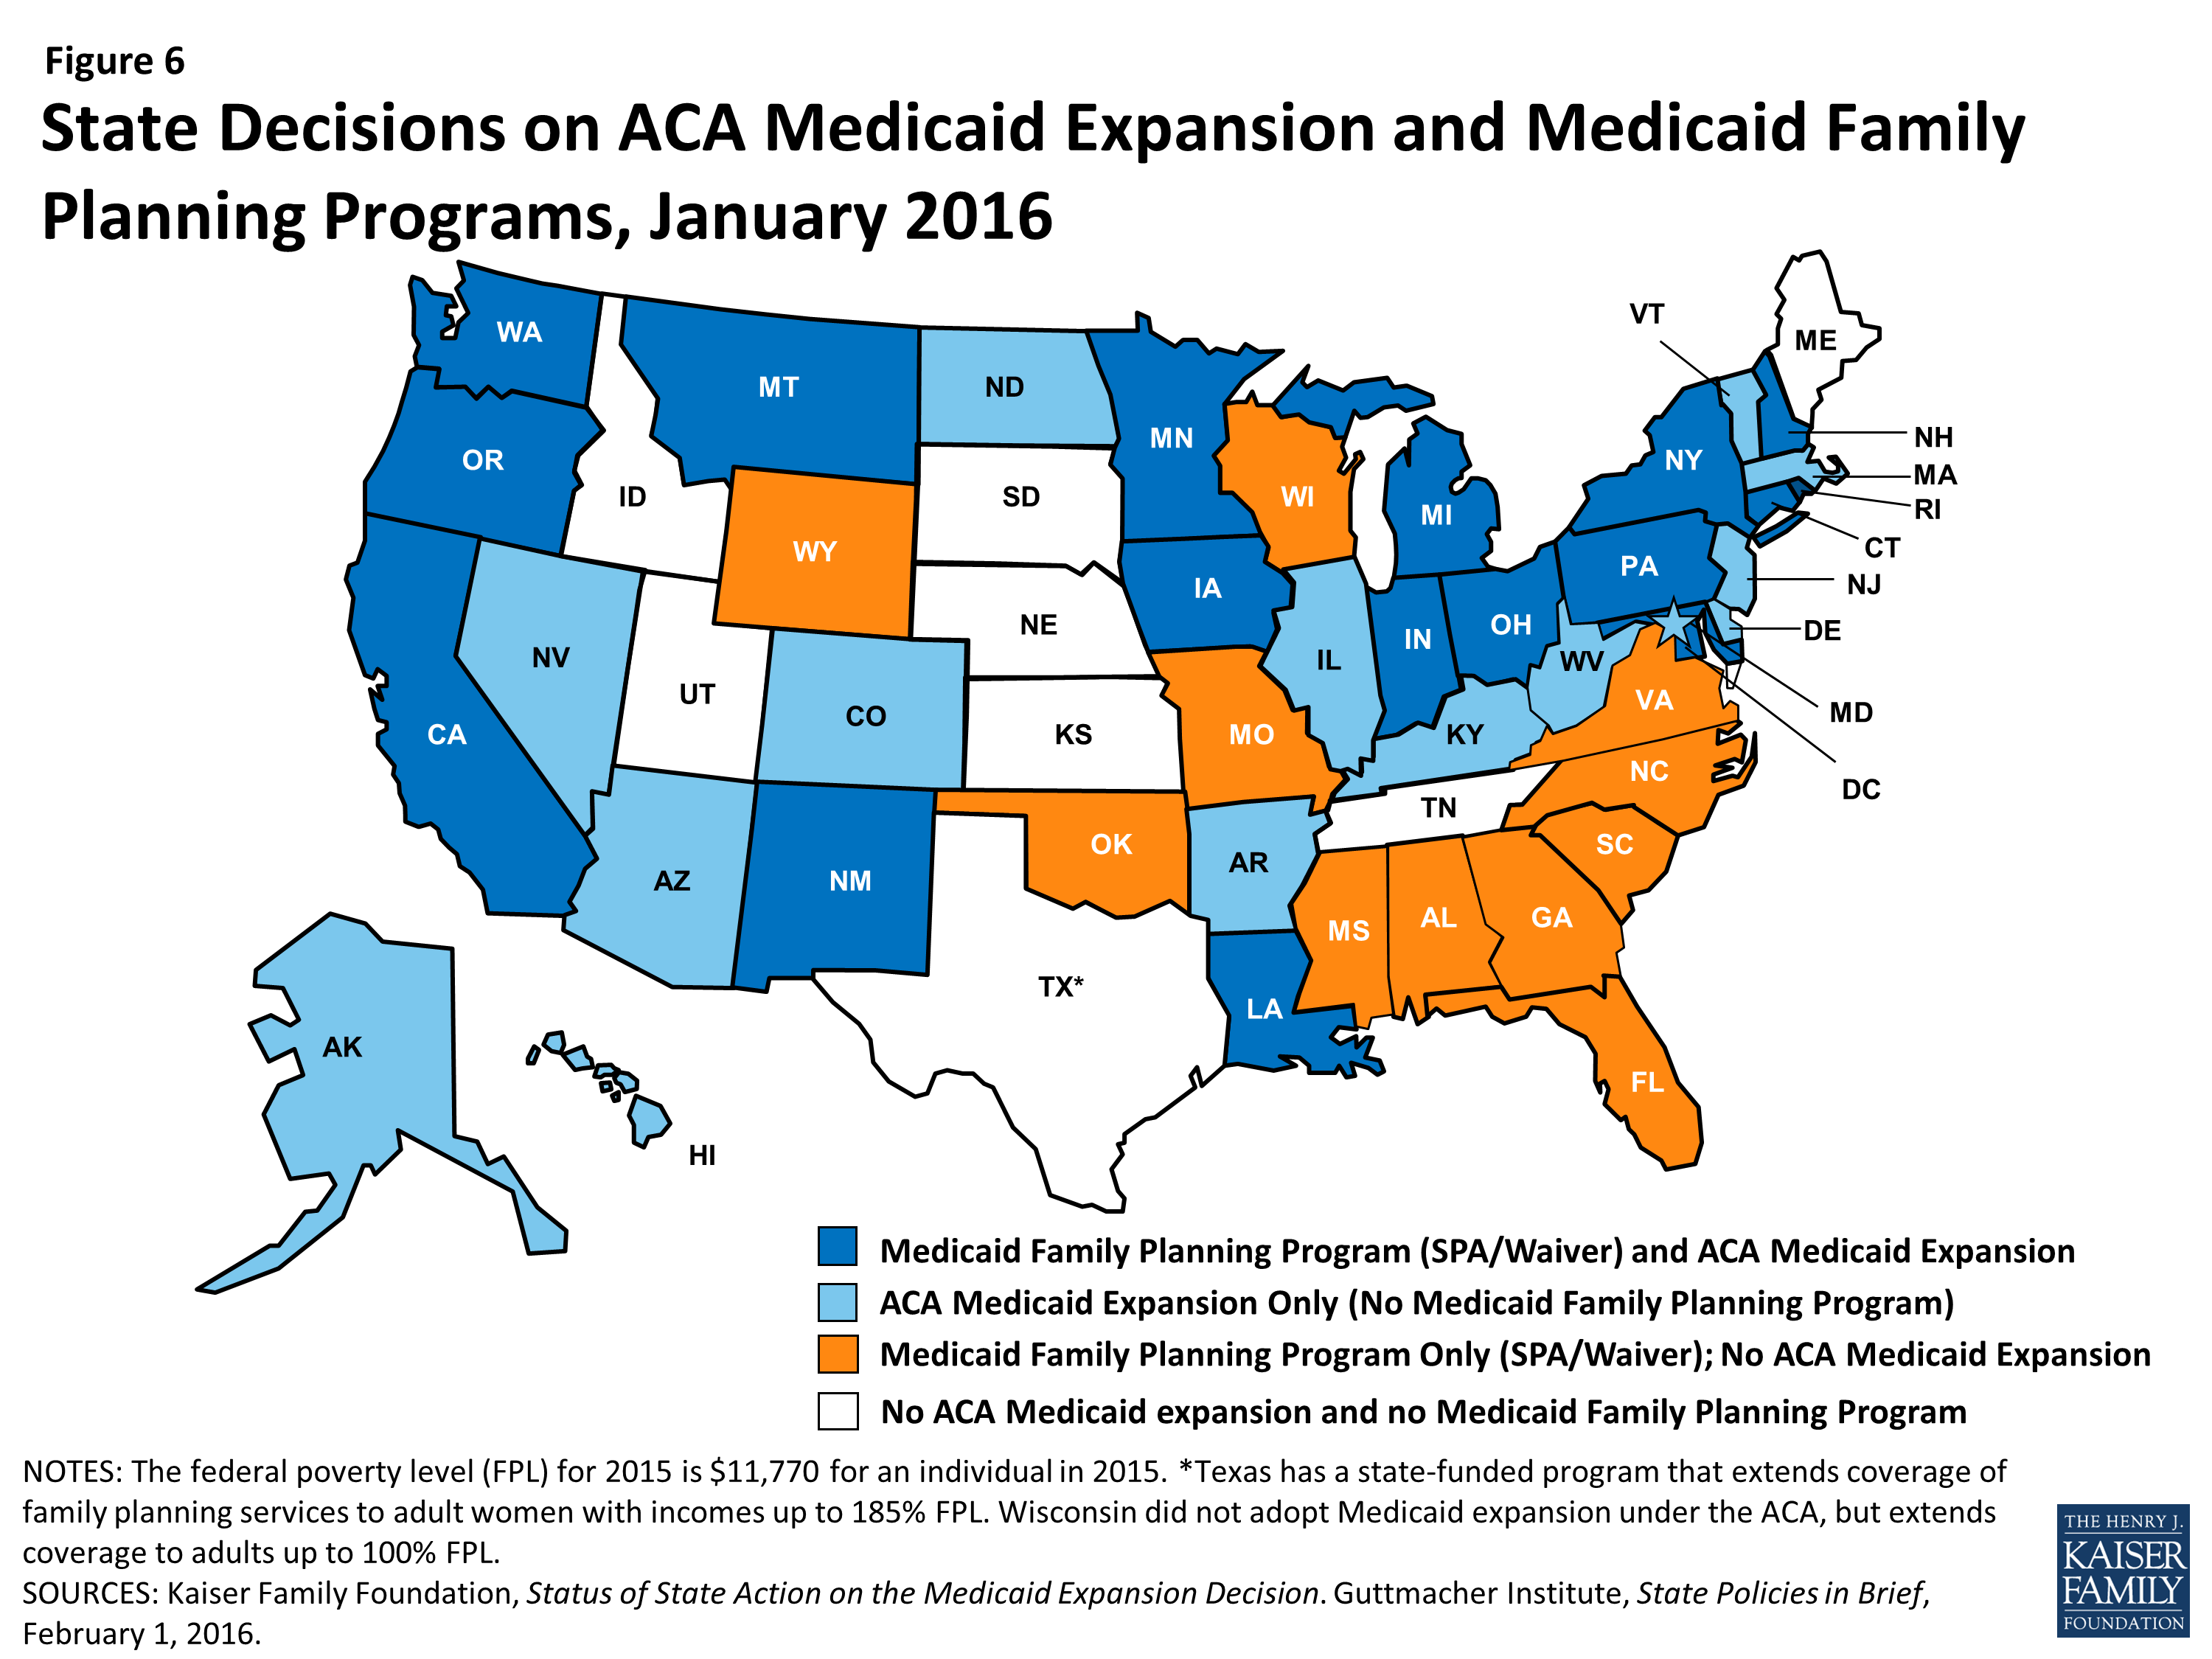 Medicaid and Family Planning The ACA, Medicaid Expansion, and Family